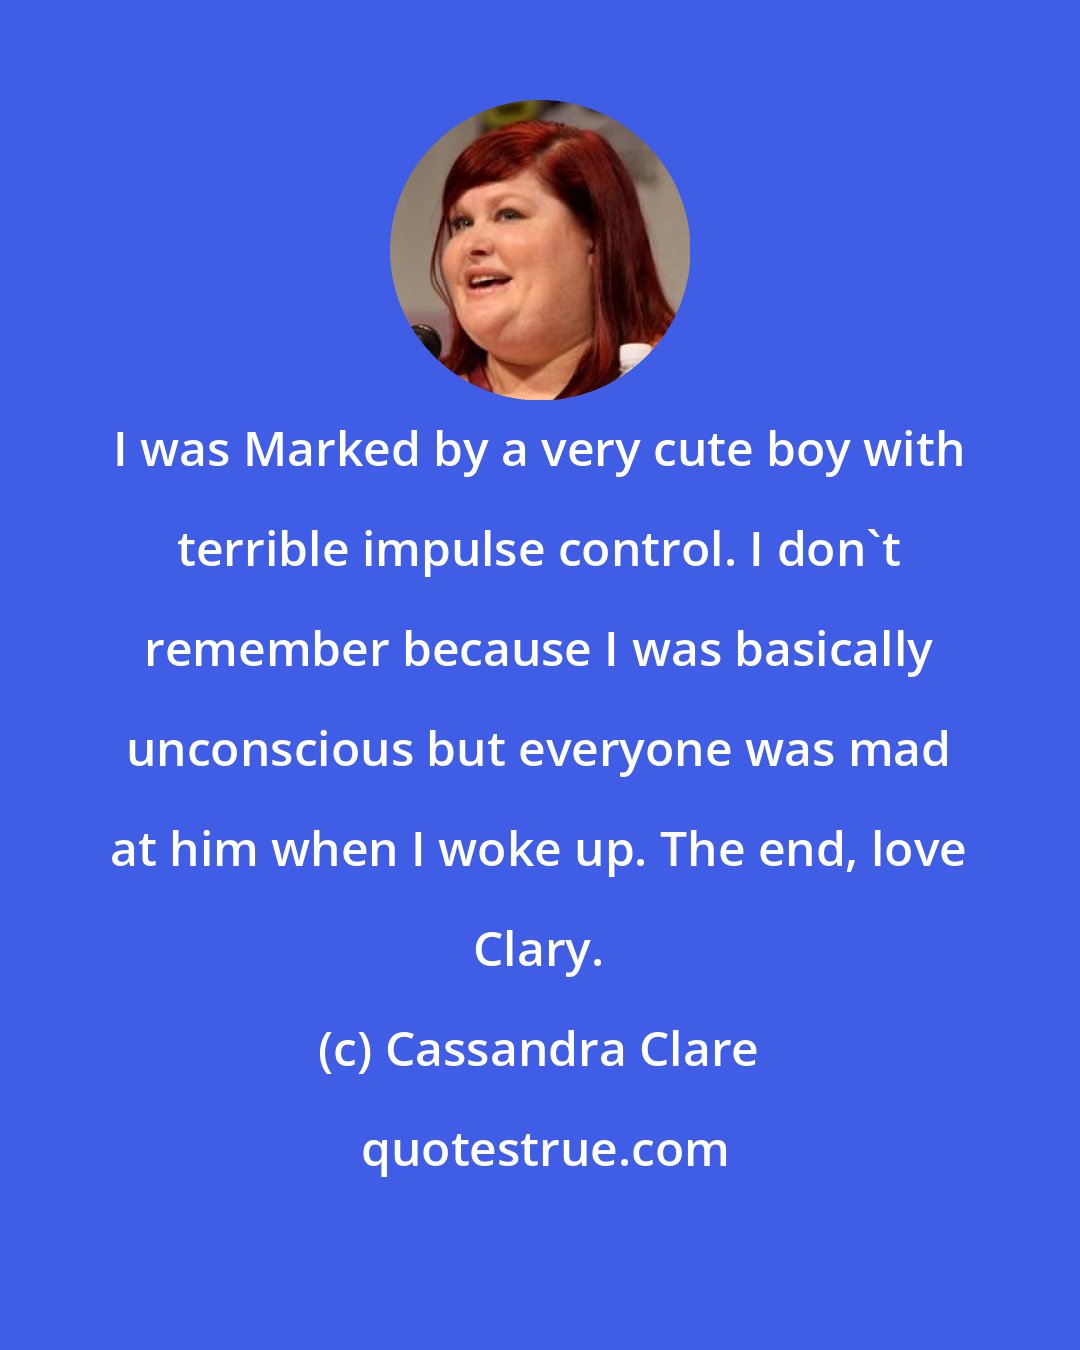 Cassandra Clare: I was Marked by a very cute boy with terrible impulse control. I don't remember because I was basically unconscious but everyone was mad at him when I woke up. The end, love Clary.